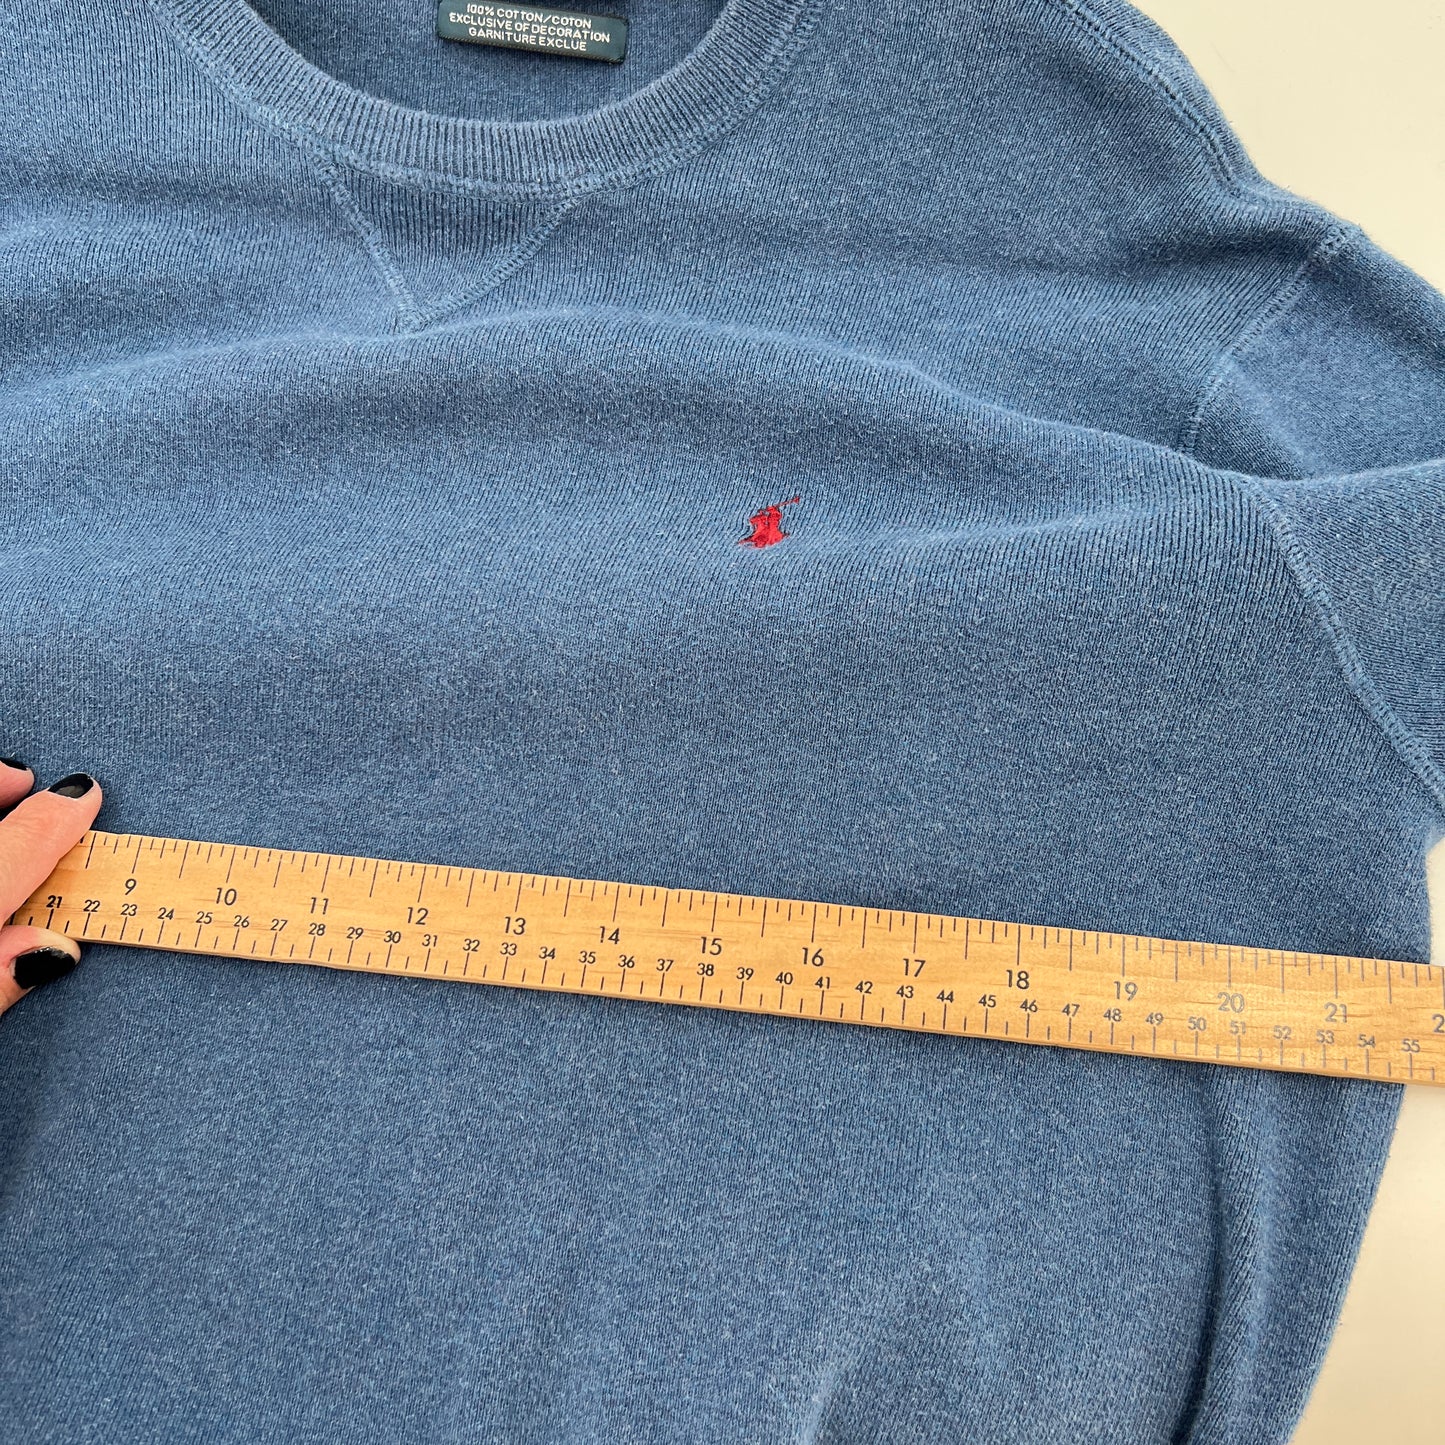 SOLD - Vintage Polo by Ralph Lauren Cotton Sweater